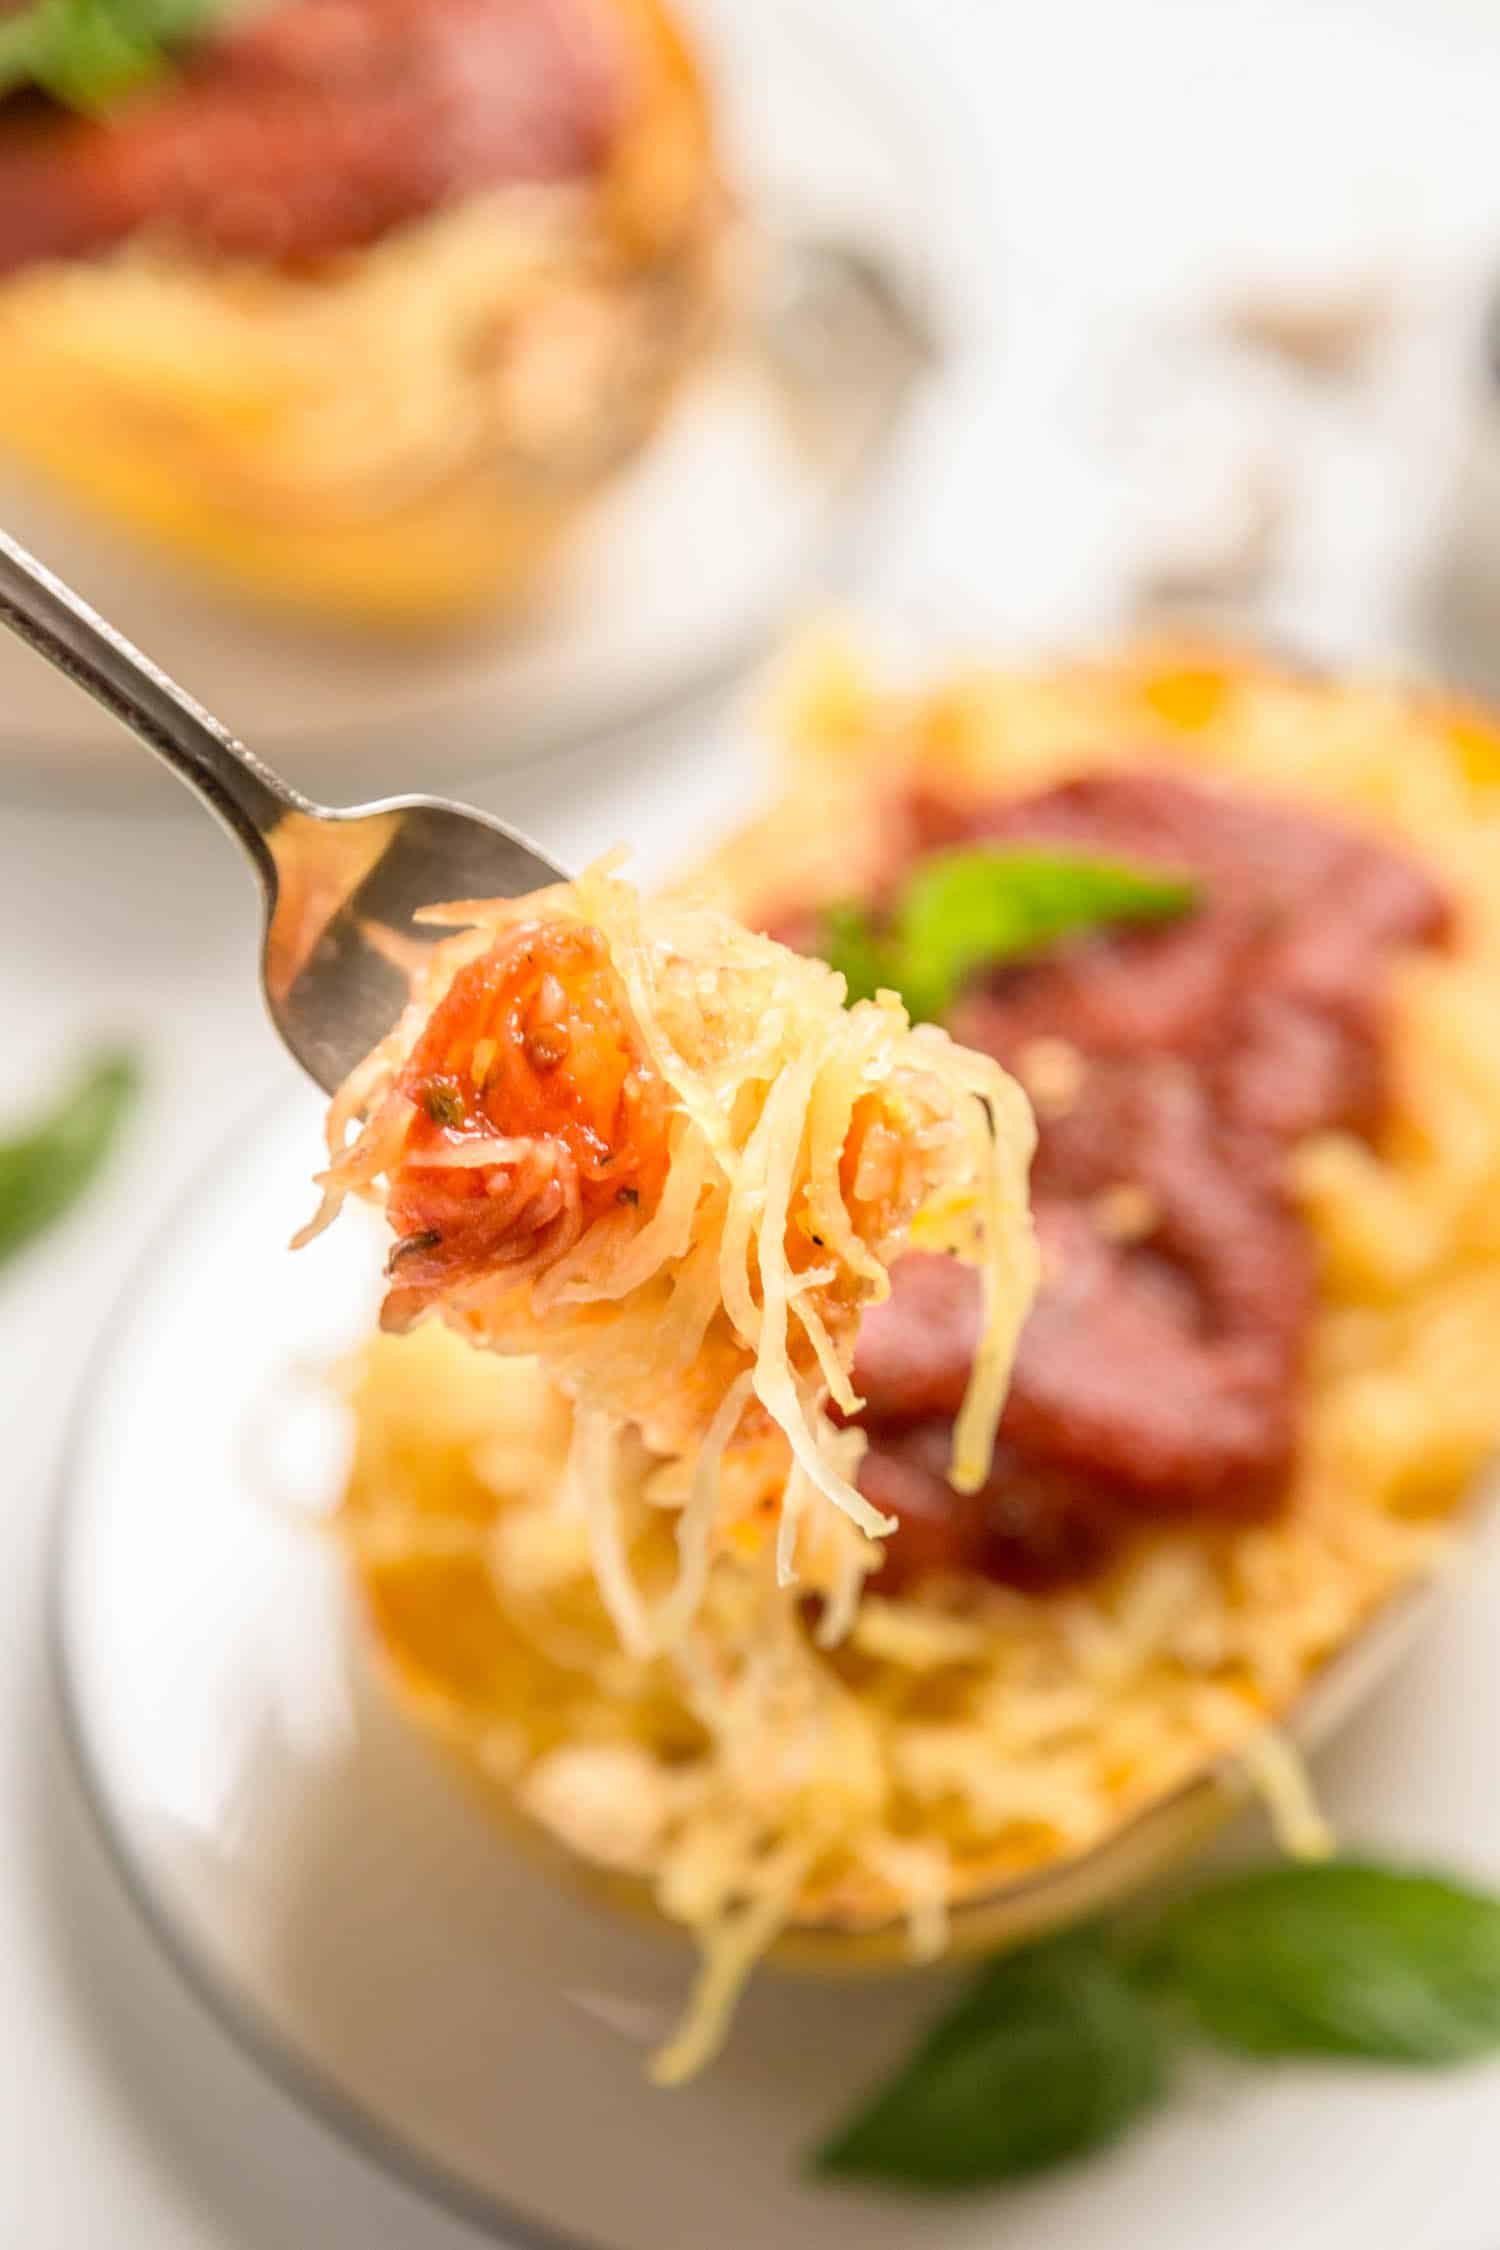 A fork full of spaghetti squash with tomato sauce